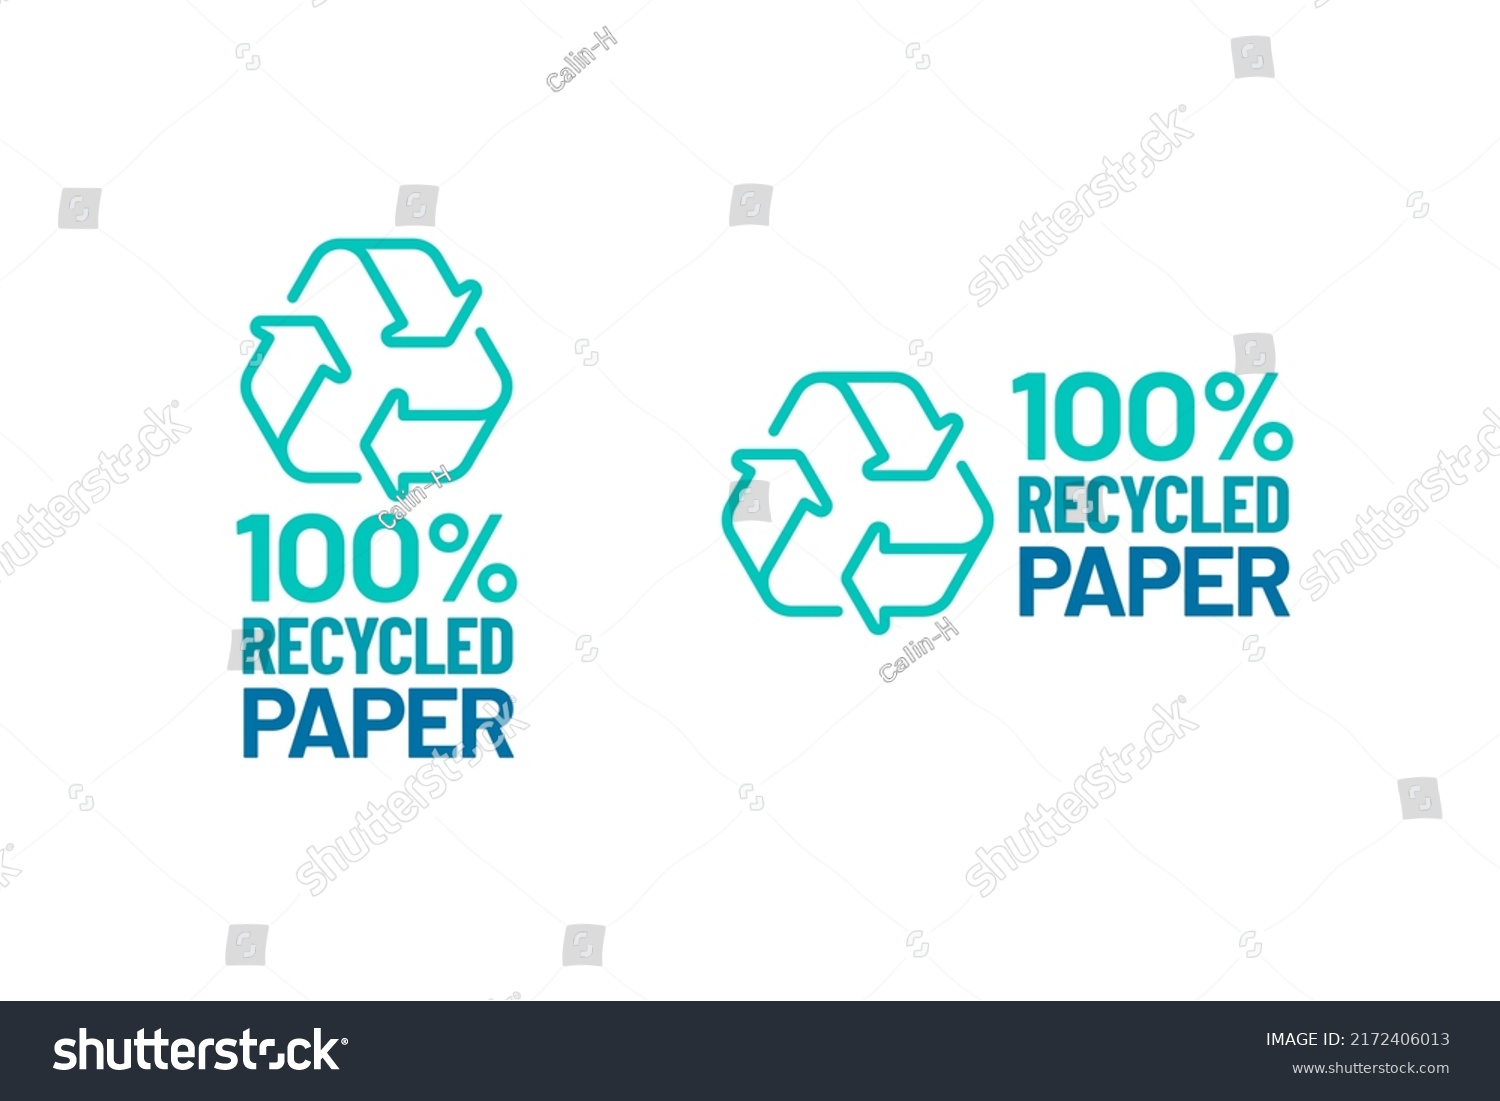 Recycled paper vector icon logo badge #2172406013